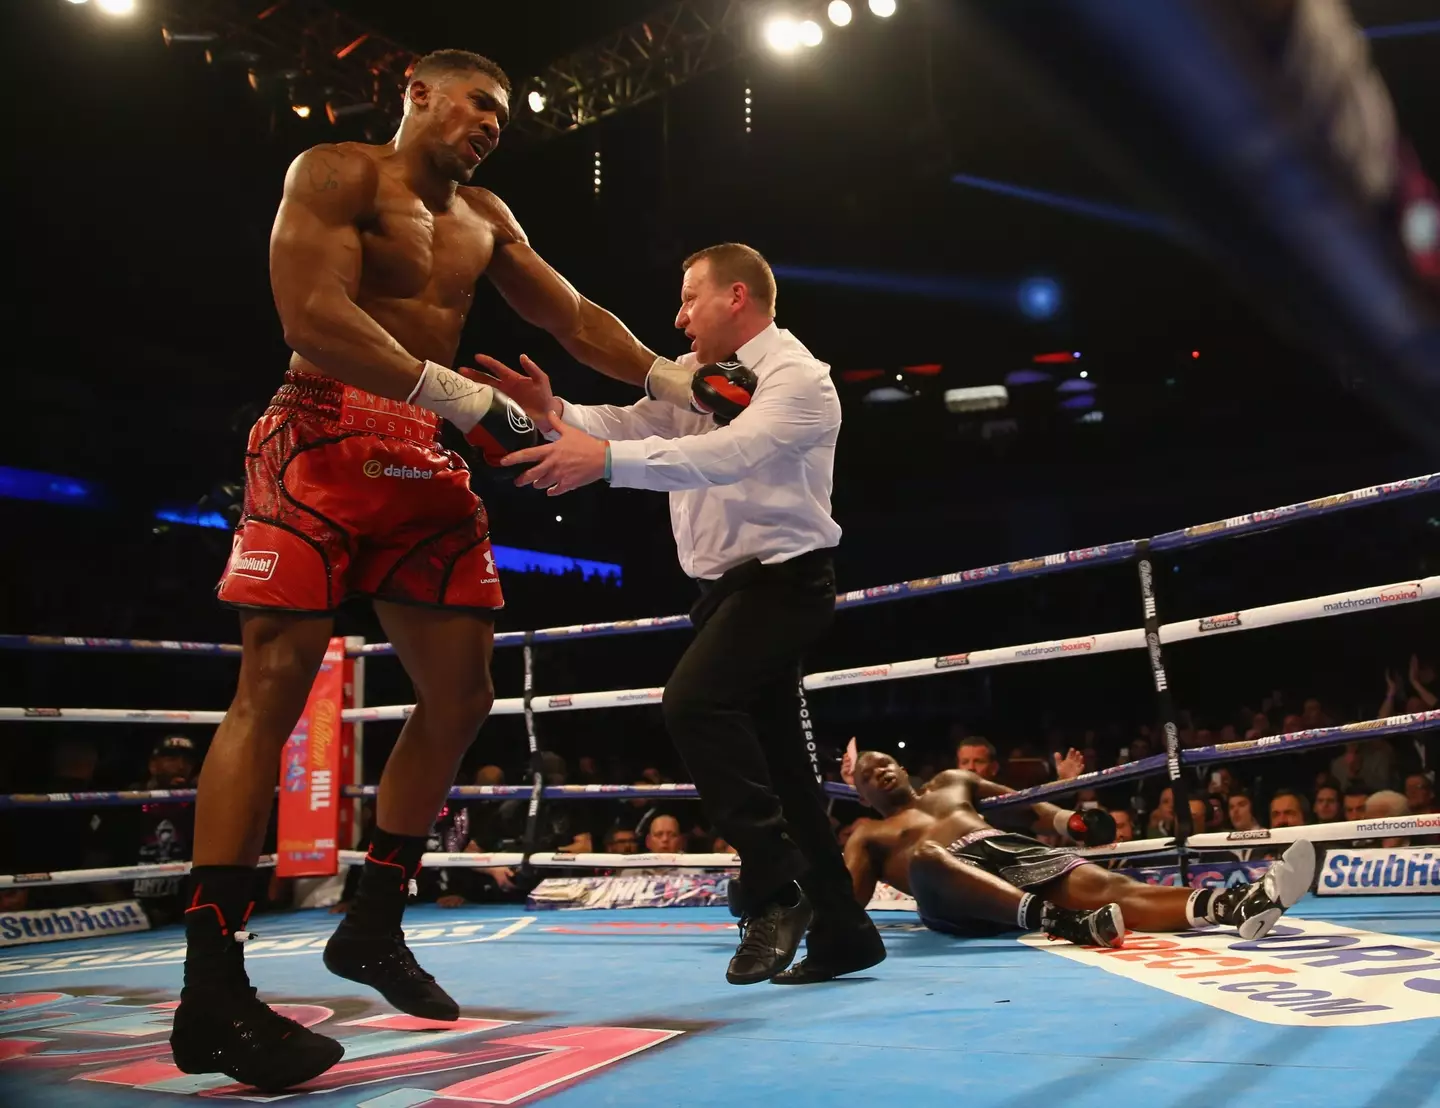 Joshua after flooring Whyte in 2015. Image: Getty